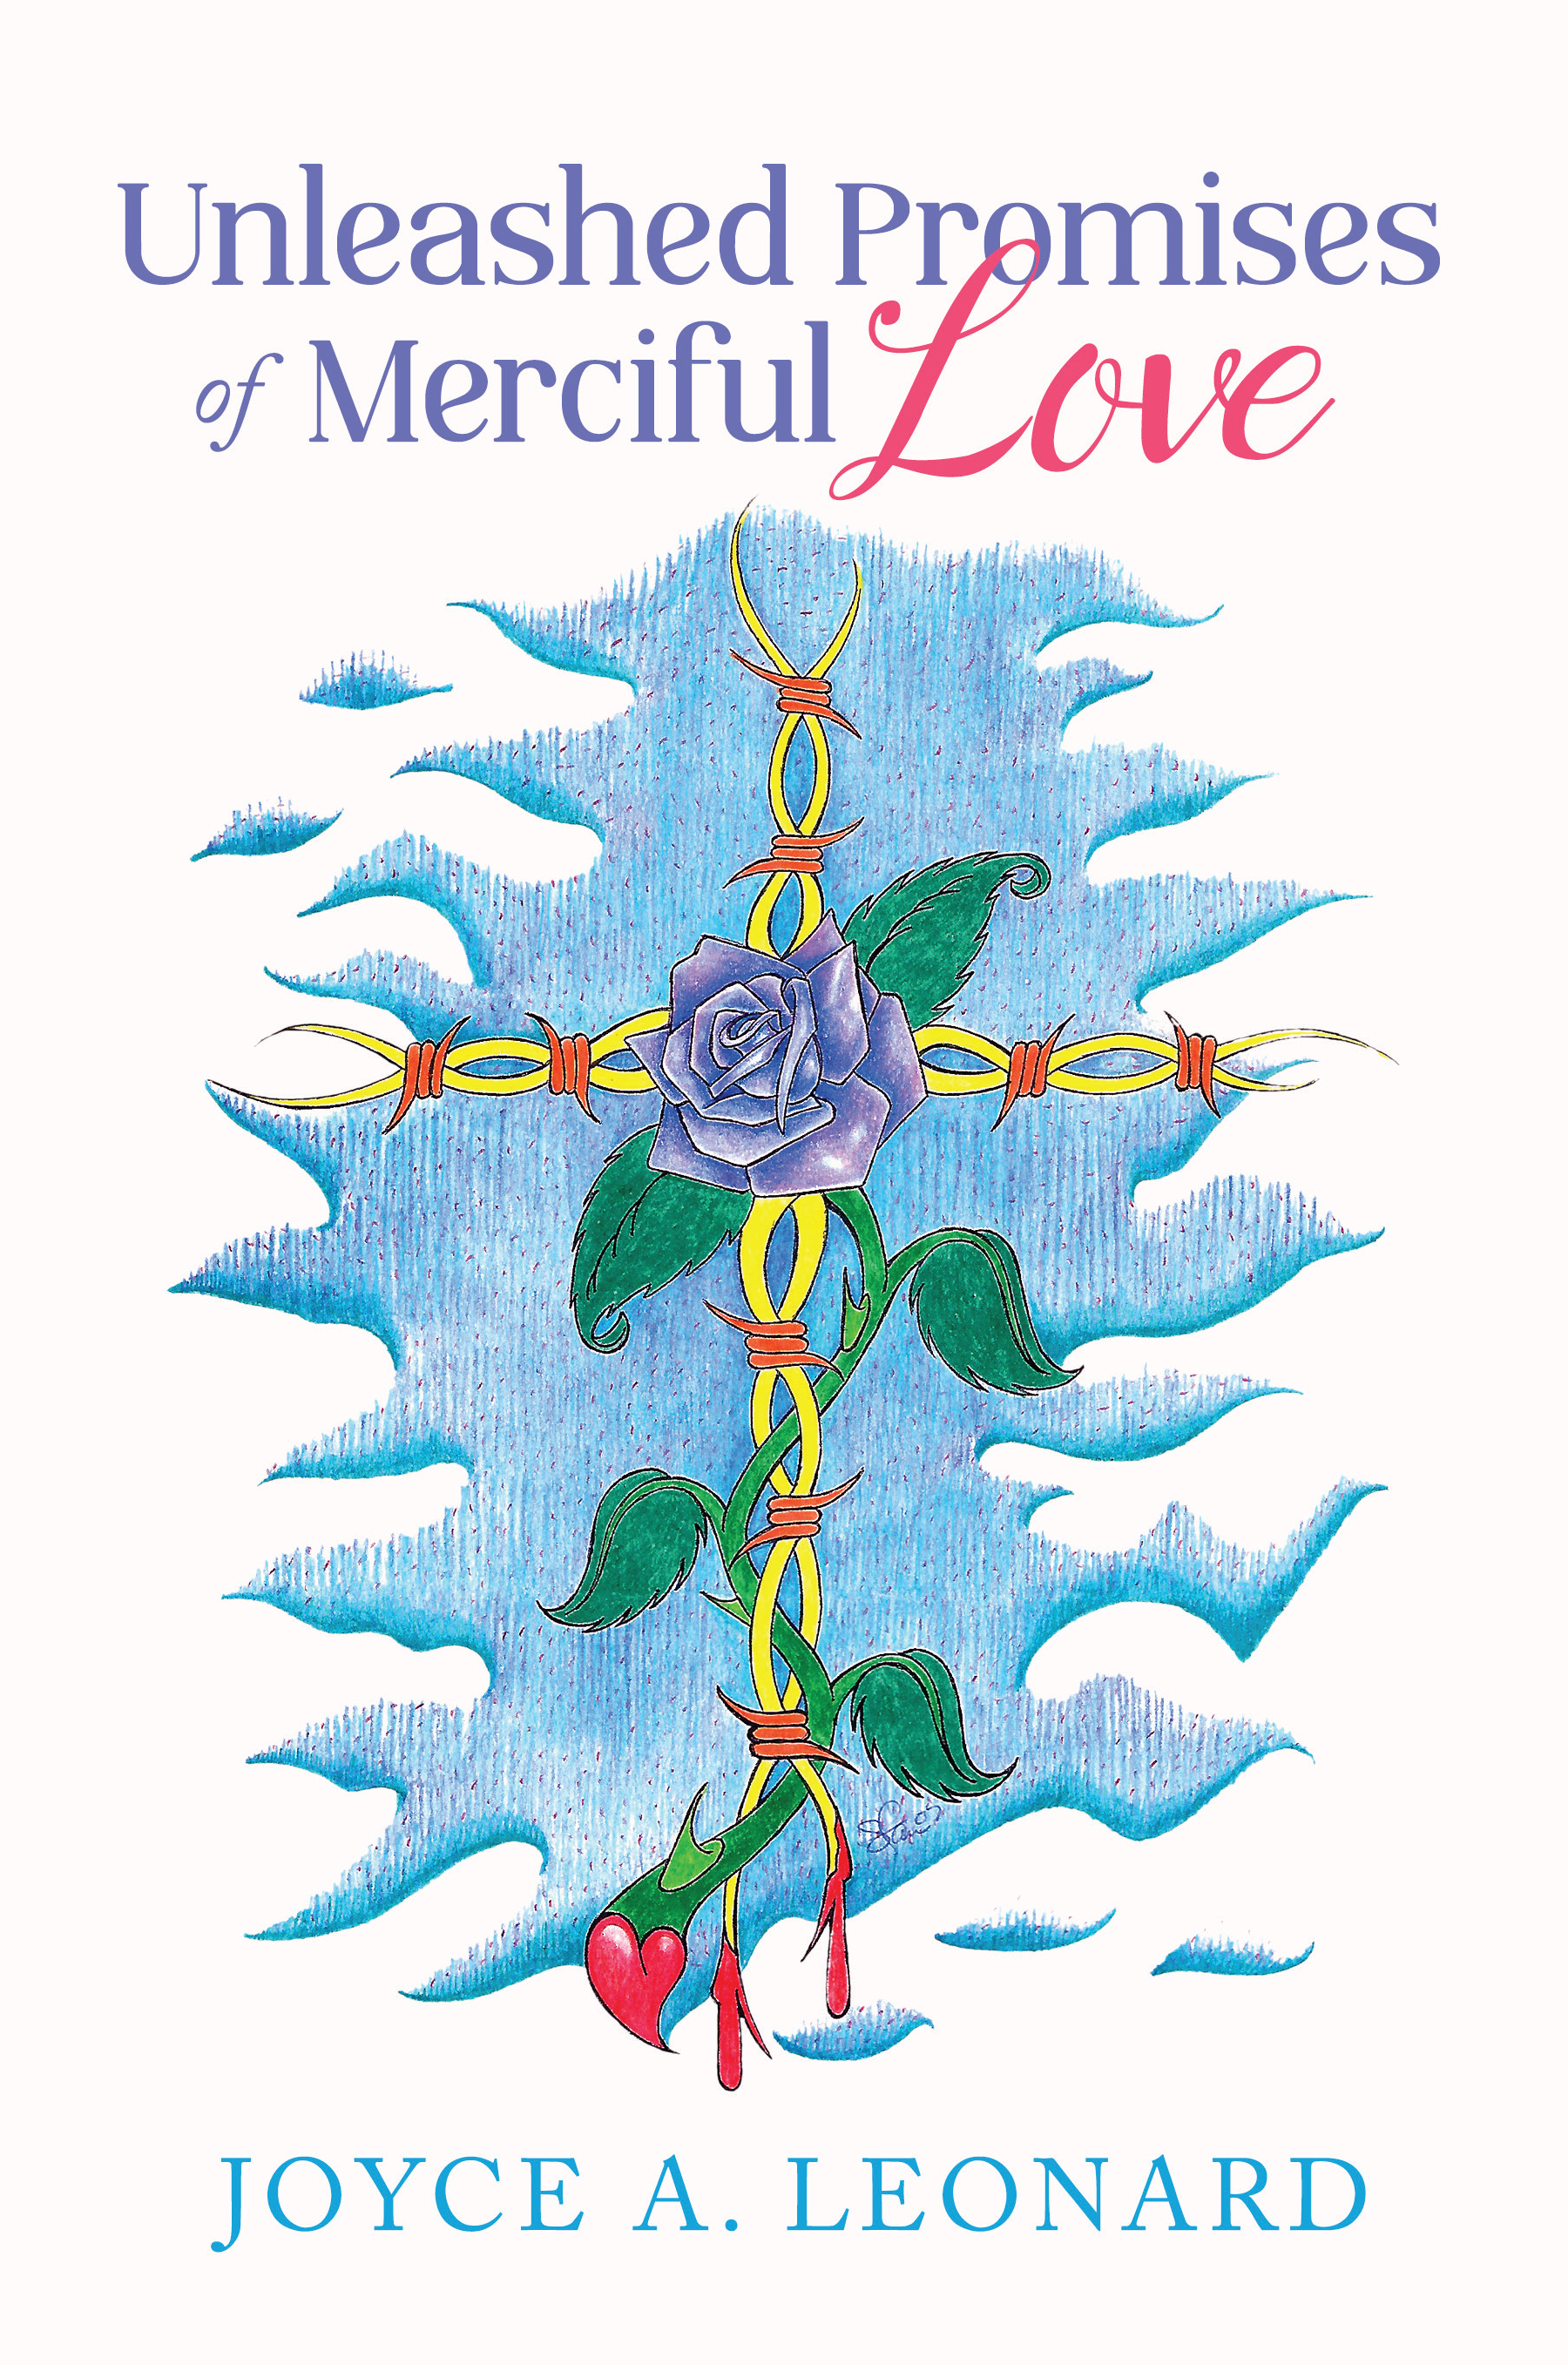 Unleashed Promises of Merciful Love by Joyce A. Leonard, An excellent tool for Bible study and meditation